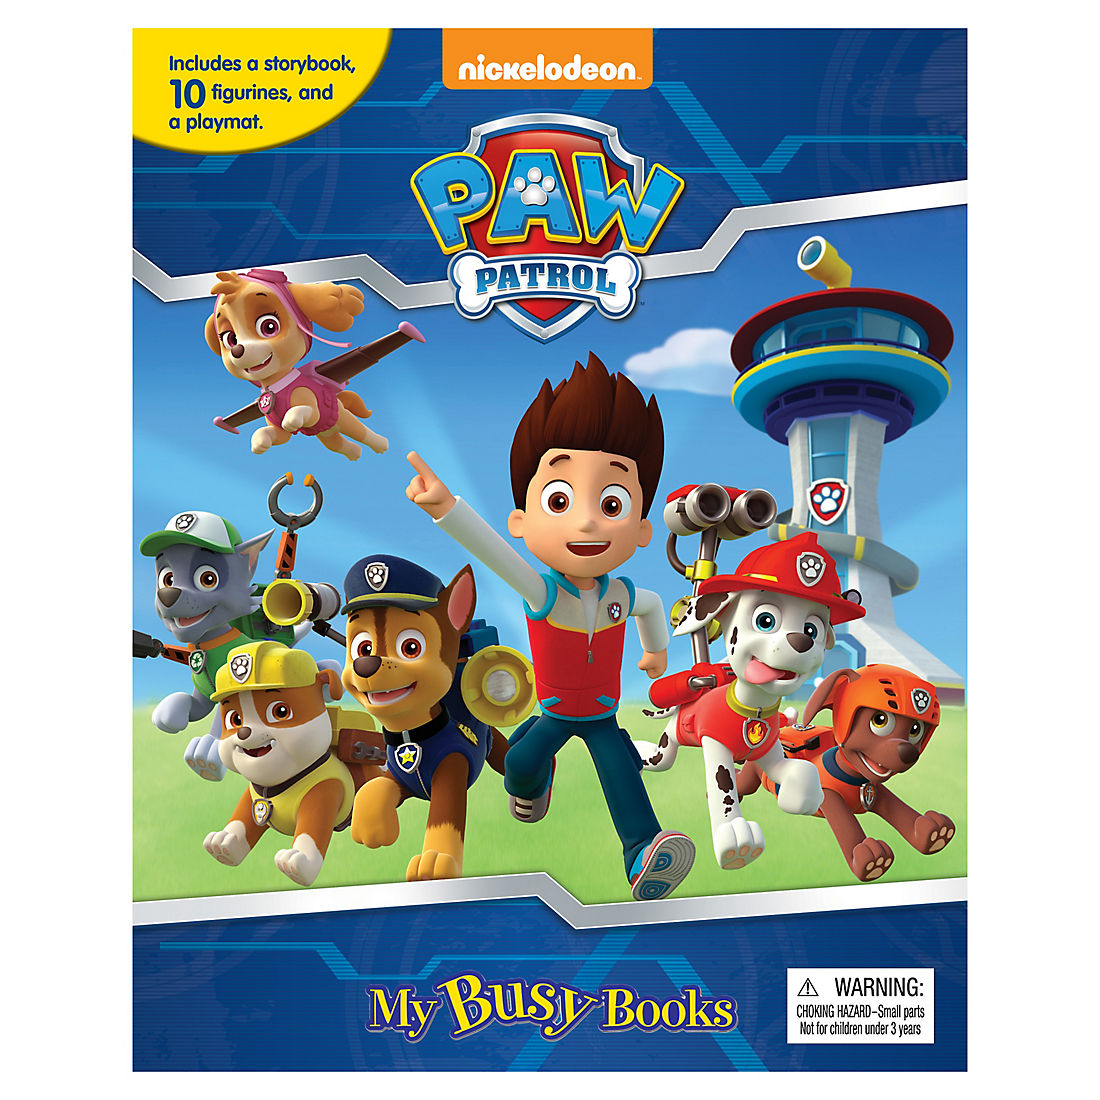 Nickelodeon Paw Patrol My Busy Book With Storybook 12 Figurines & a Playmat for sale online 